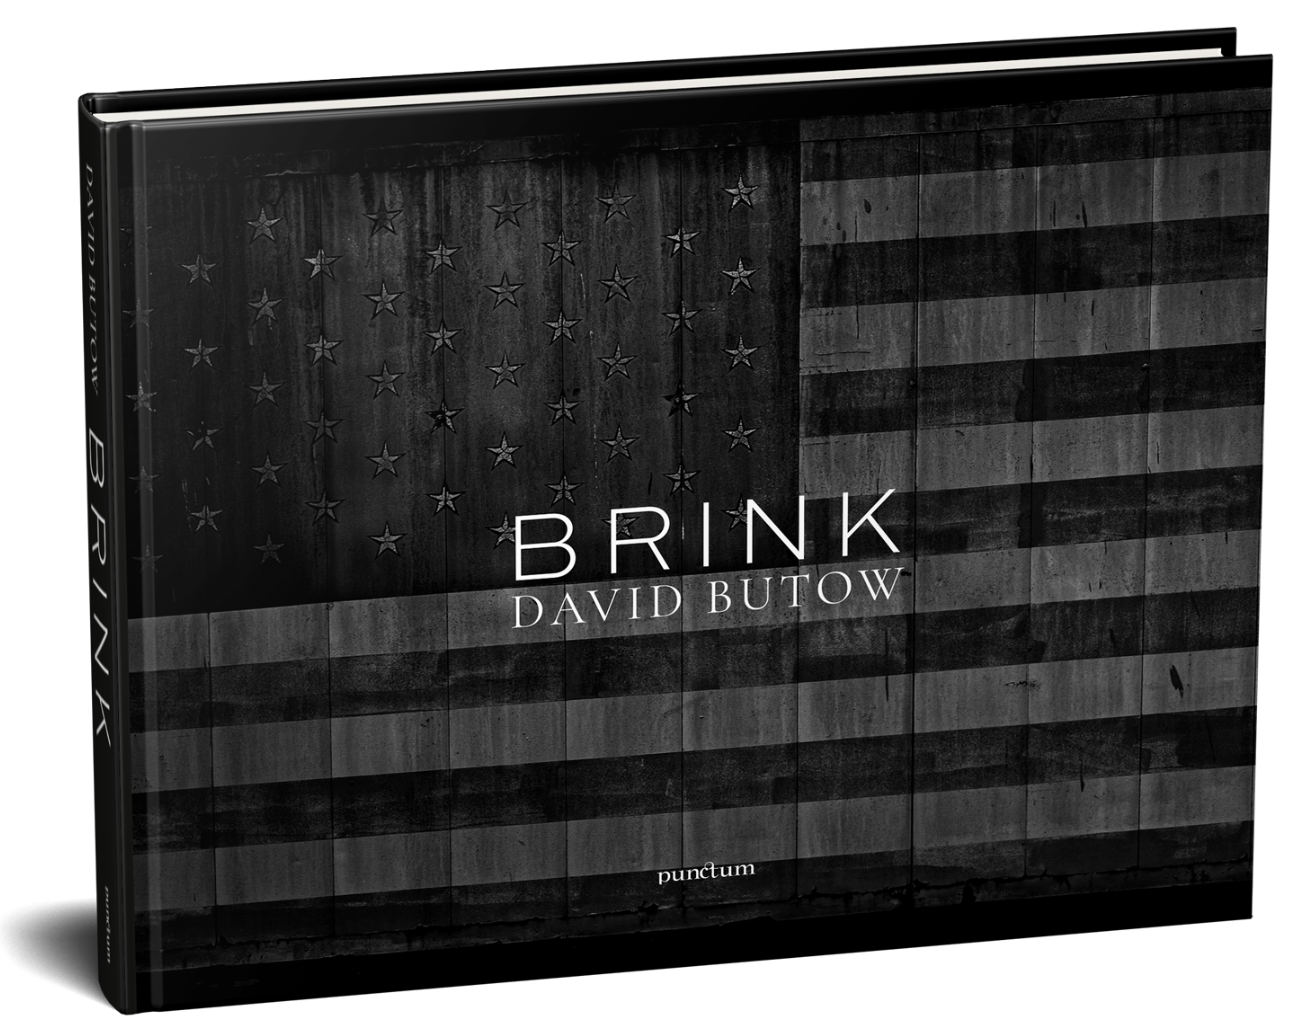 BRINK, by David Butow, is published by Punctum Books. The cover shot is a black-and-white treatment of a flag painted on the side of a barn.